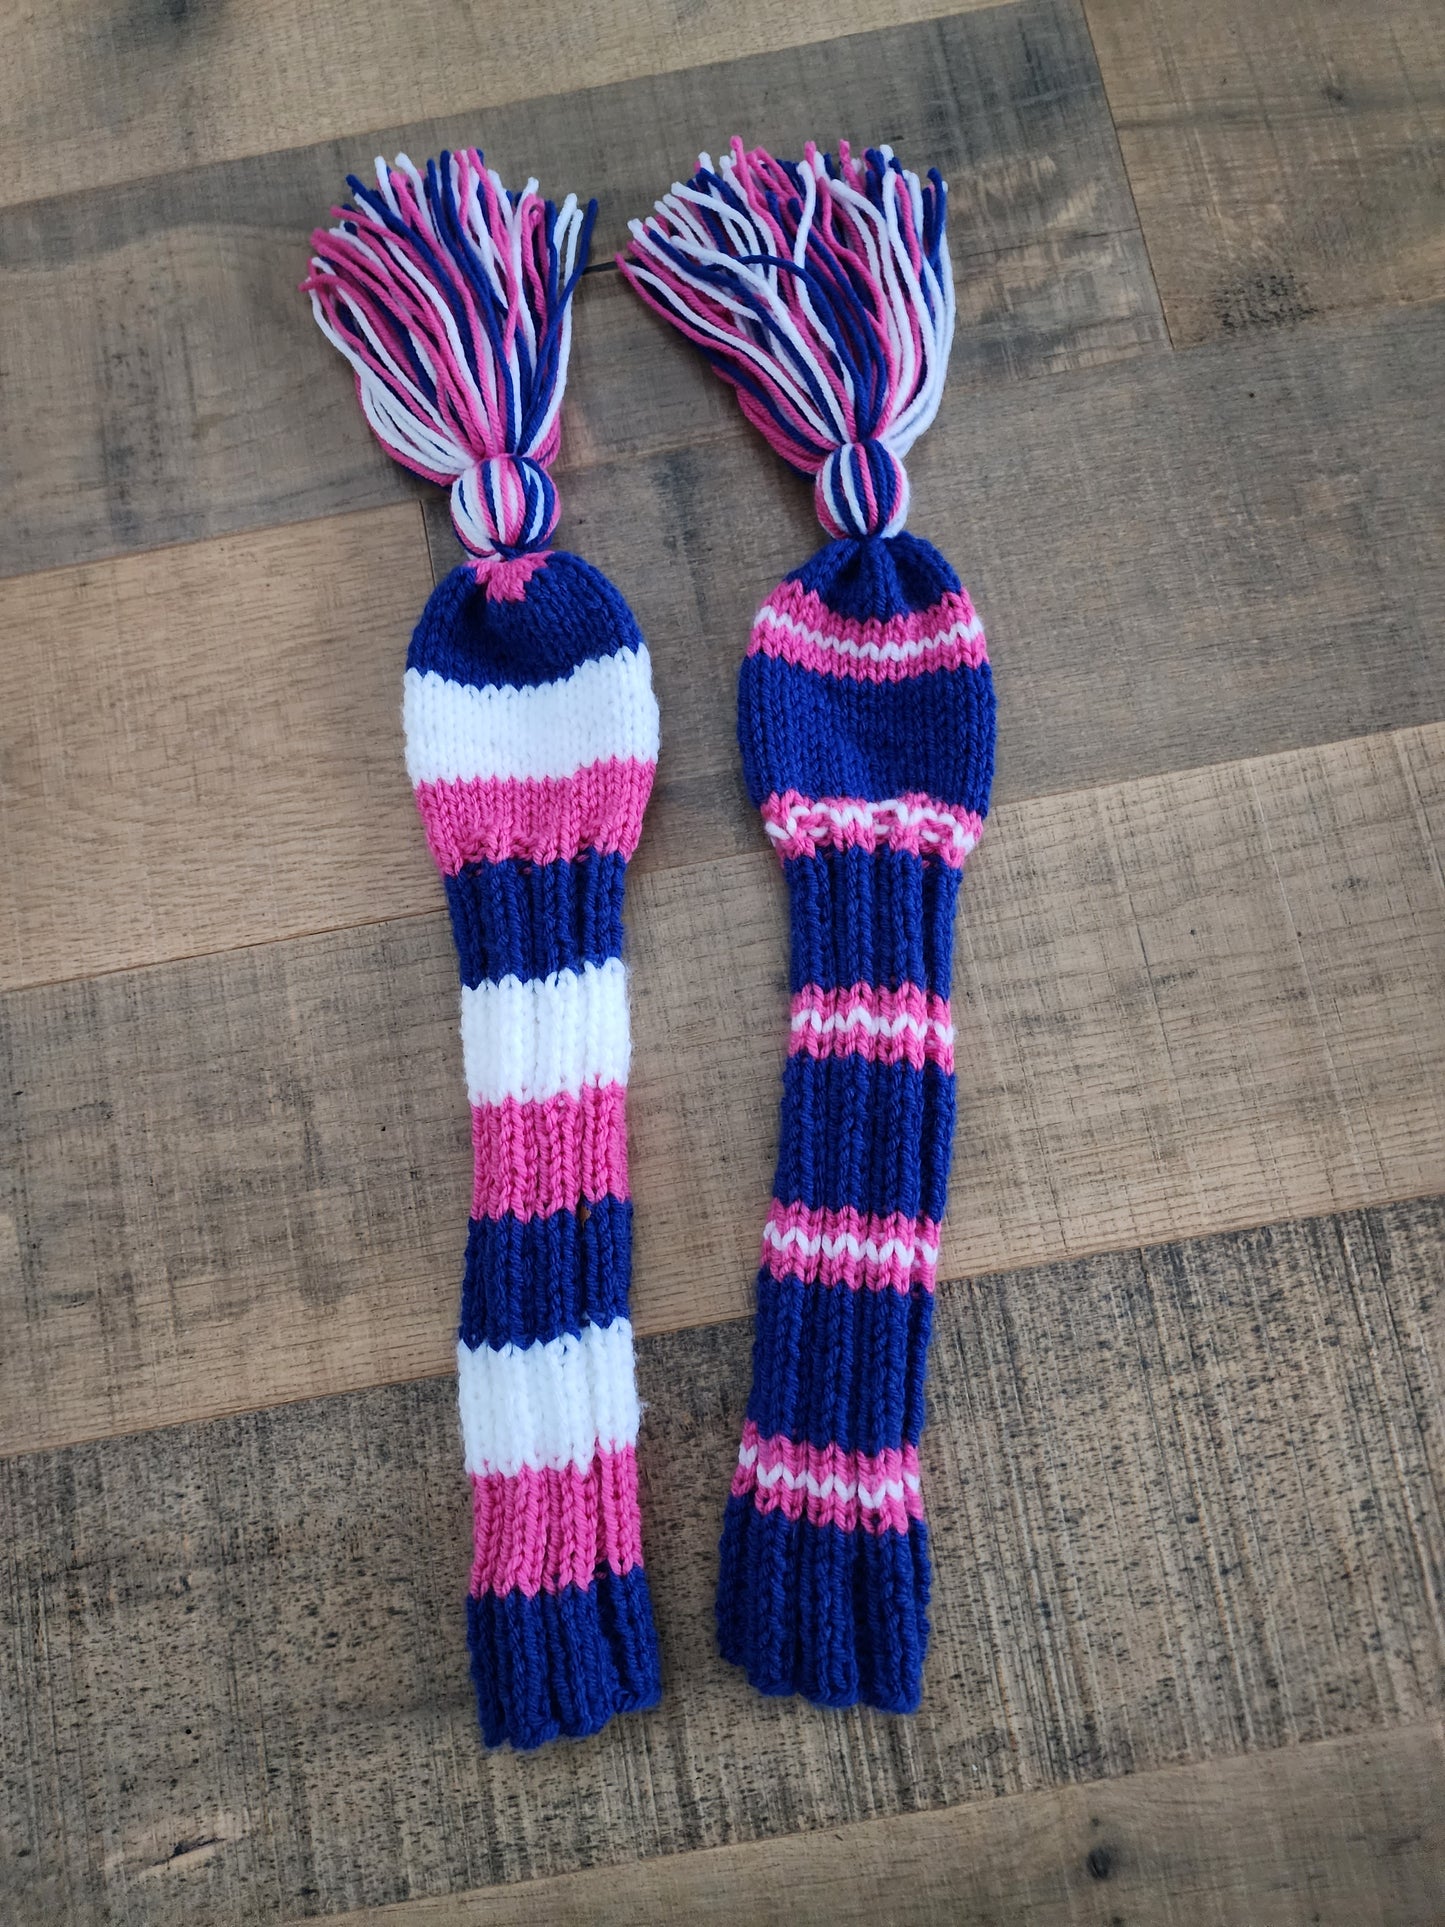 Two Golf Club Head Covers Retro-Vintage Pink, Blue & White with Tassels for Fairway Woods - Austinknittylimits